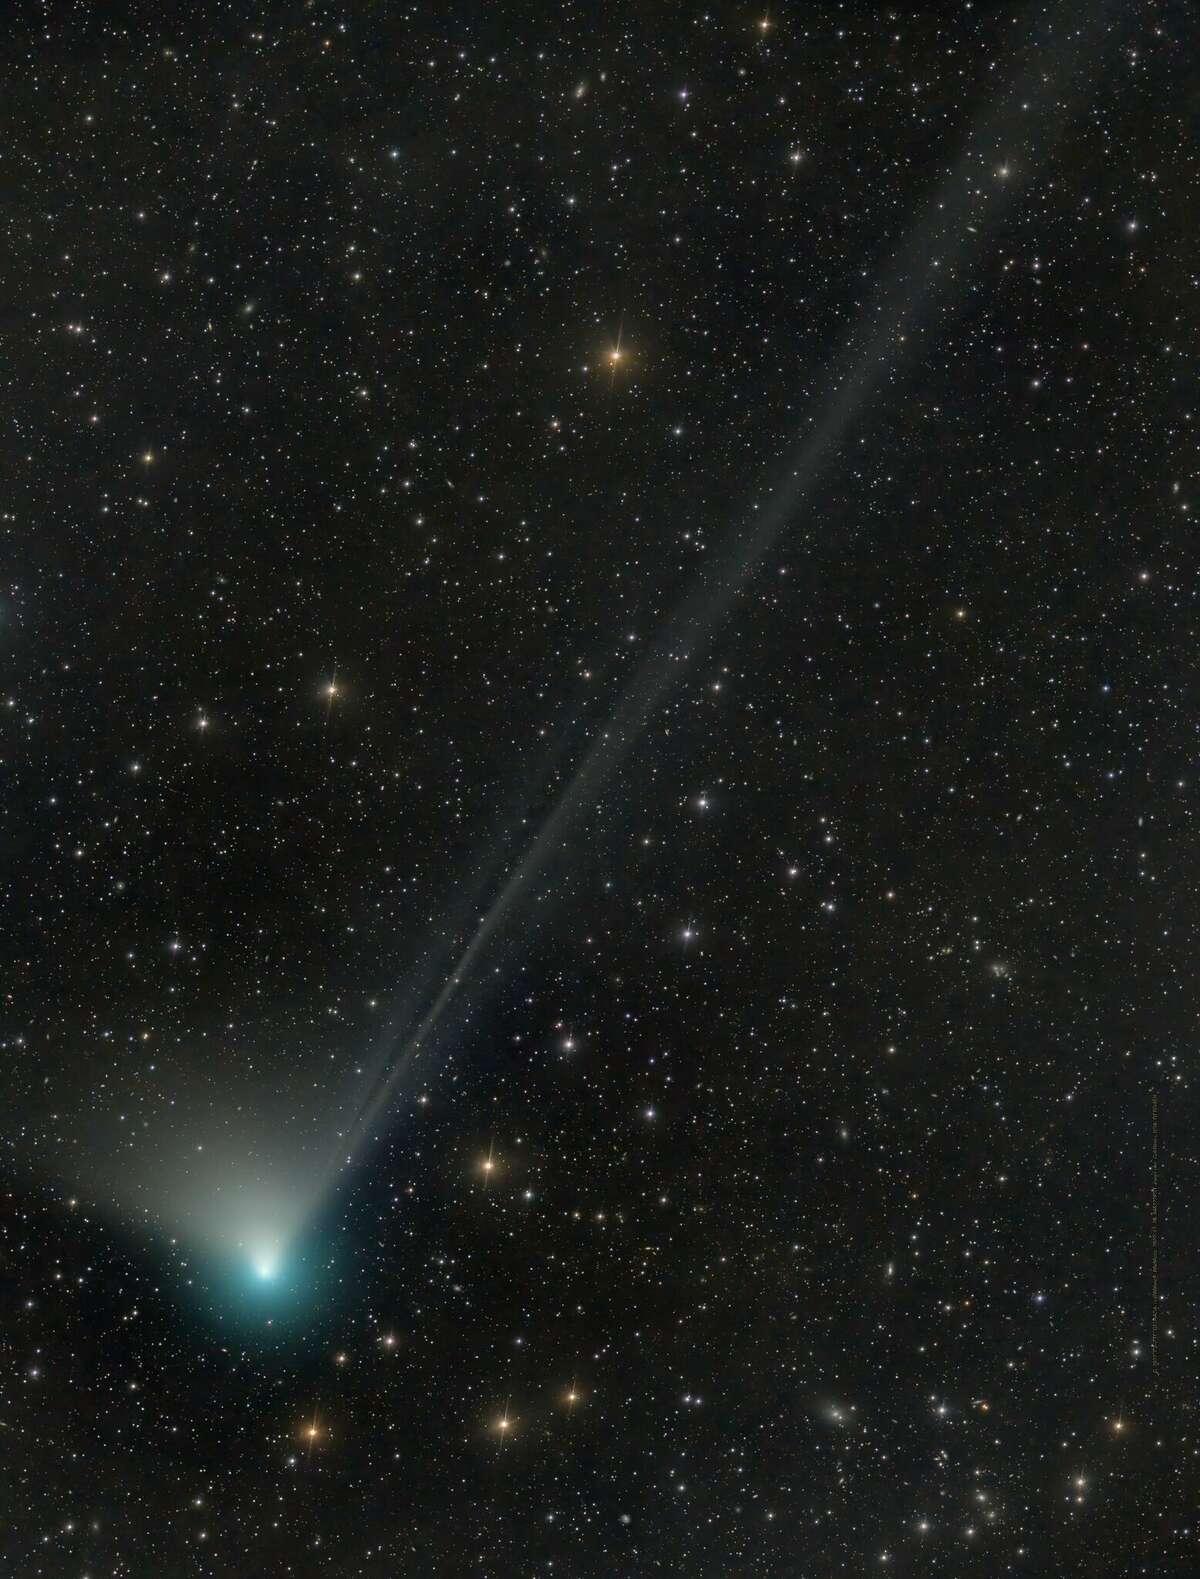 Comet C/2022 E3 (ZTF) photographed on Dec. 25, 2022, in June Lake, Calif. Photo by Dan Bartlett.